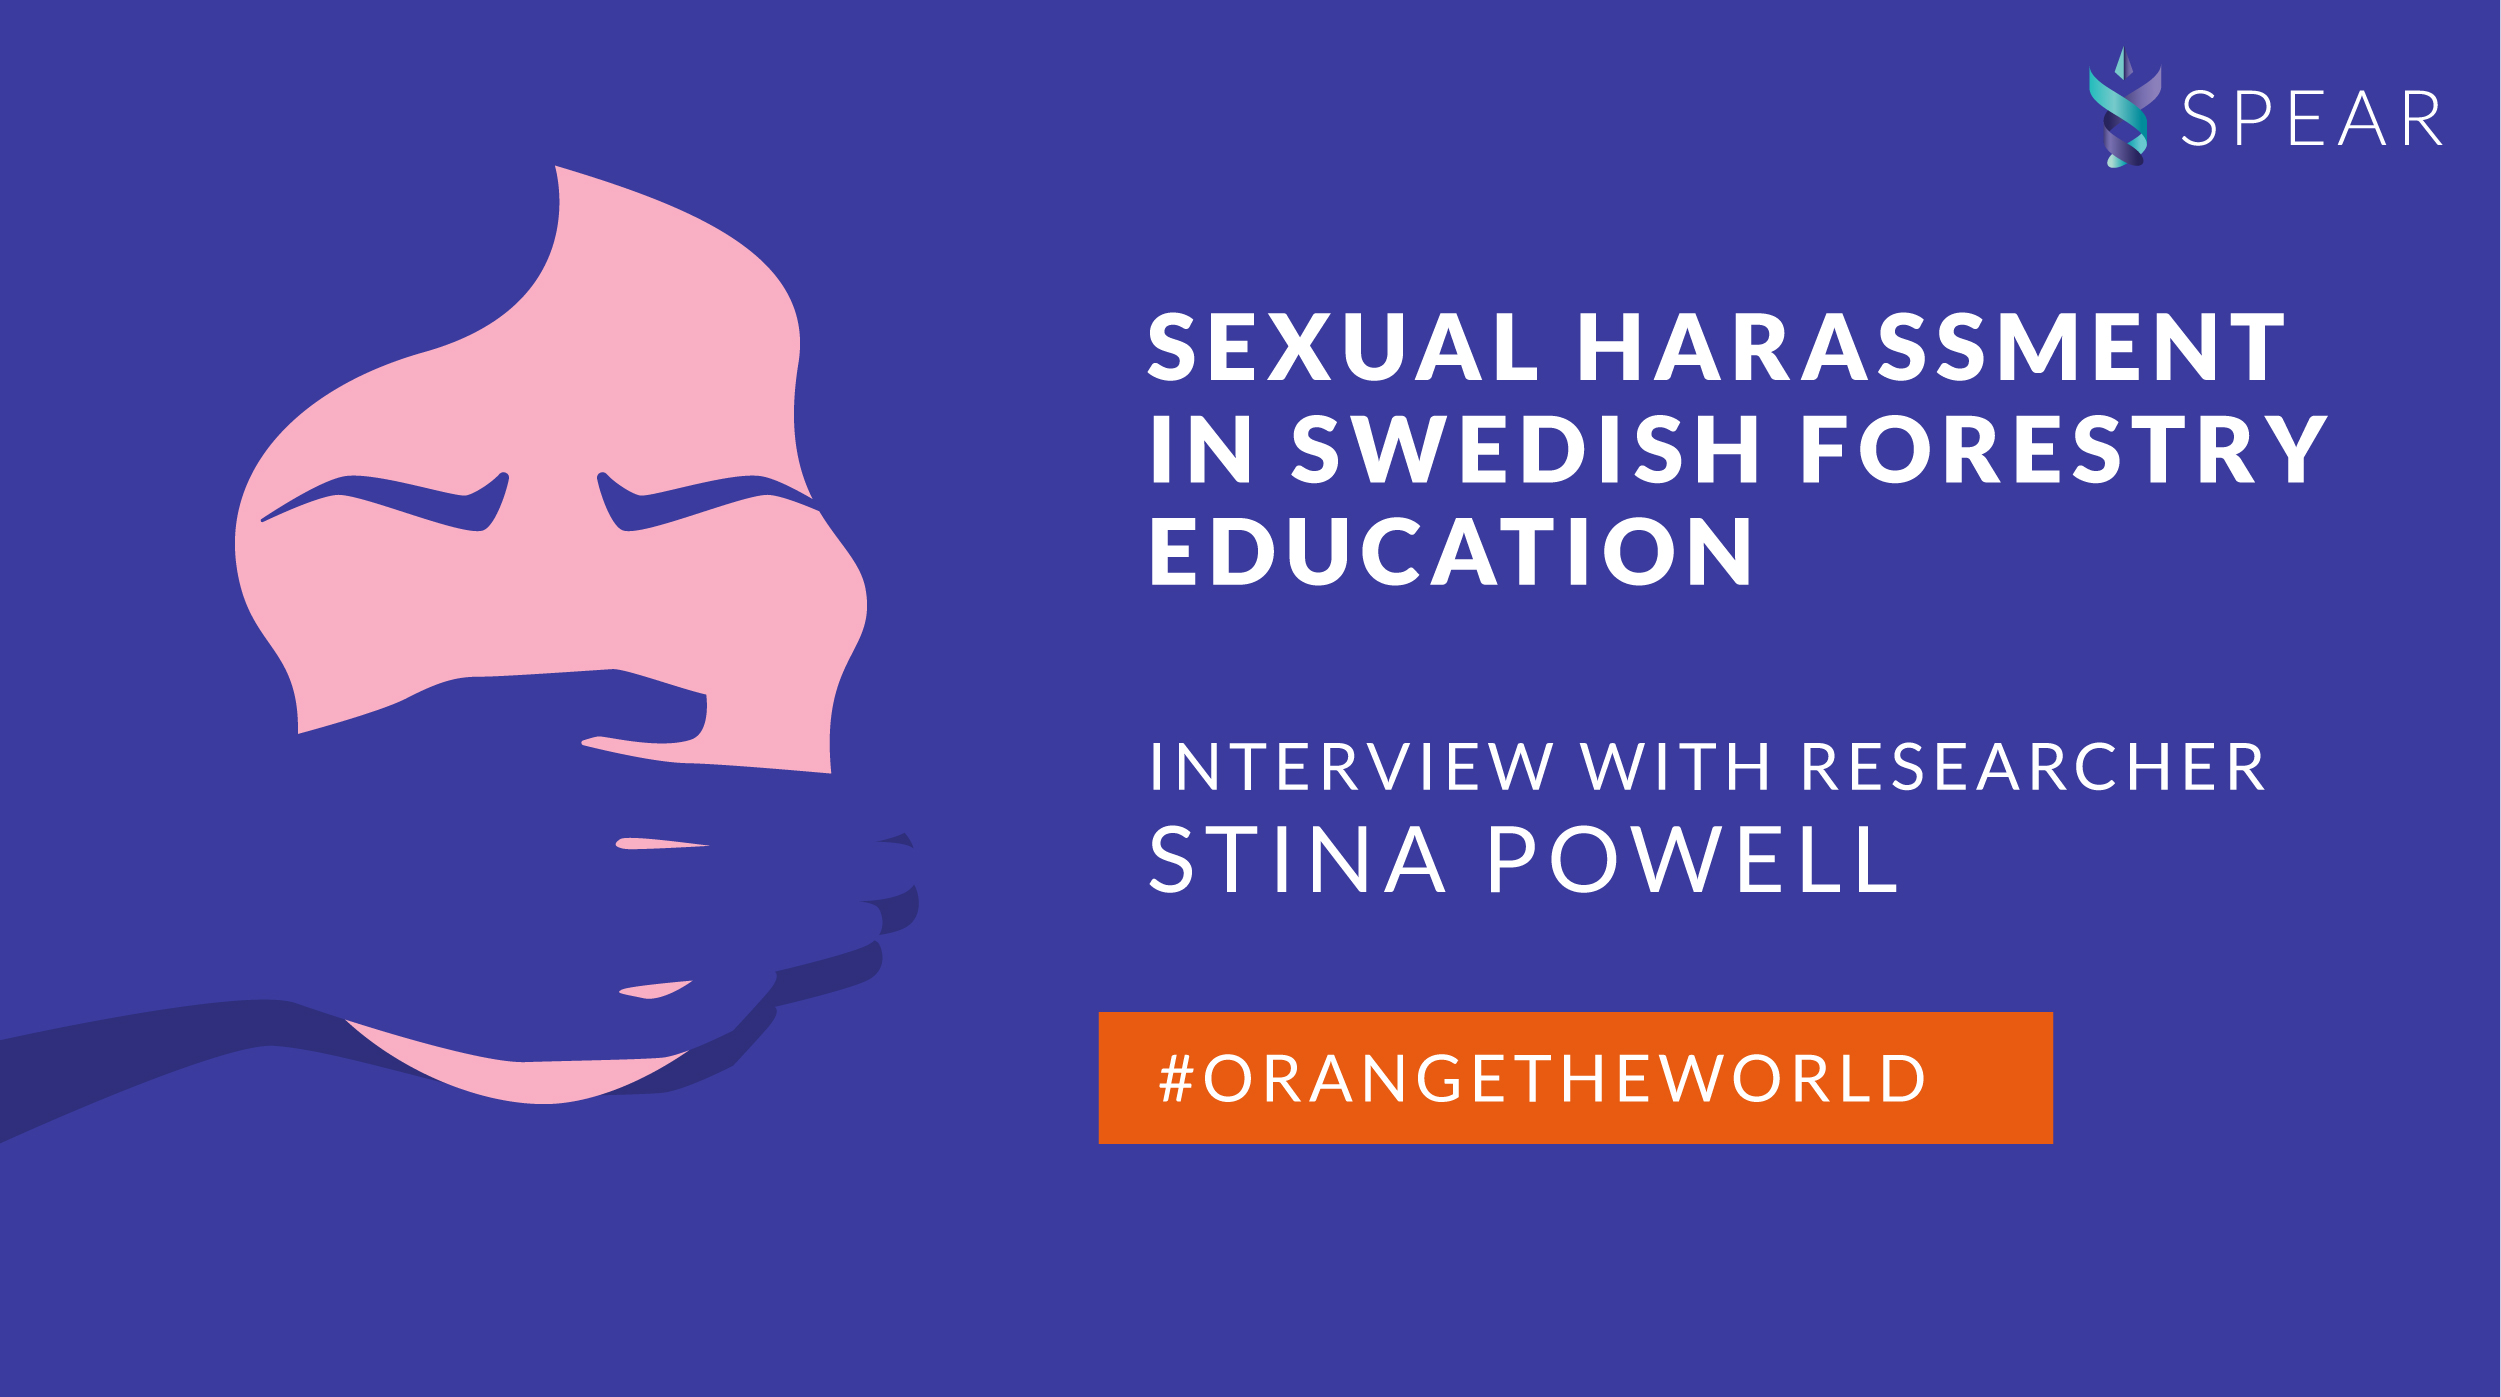 Sexual harassment in Swedish forestry education – interview with researcher Stina Powell